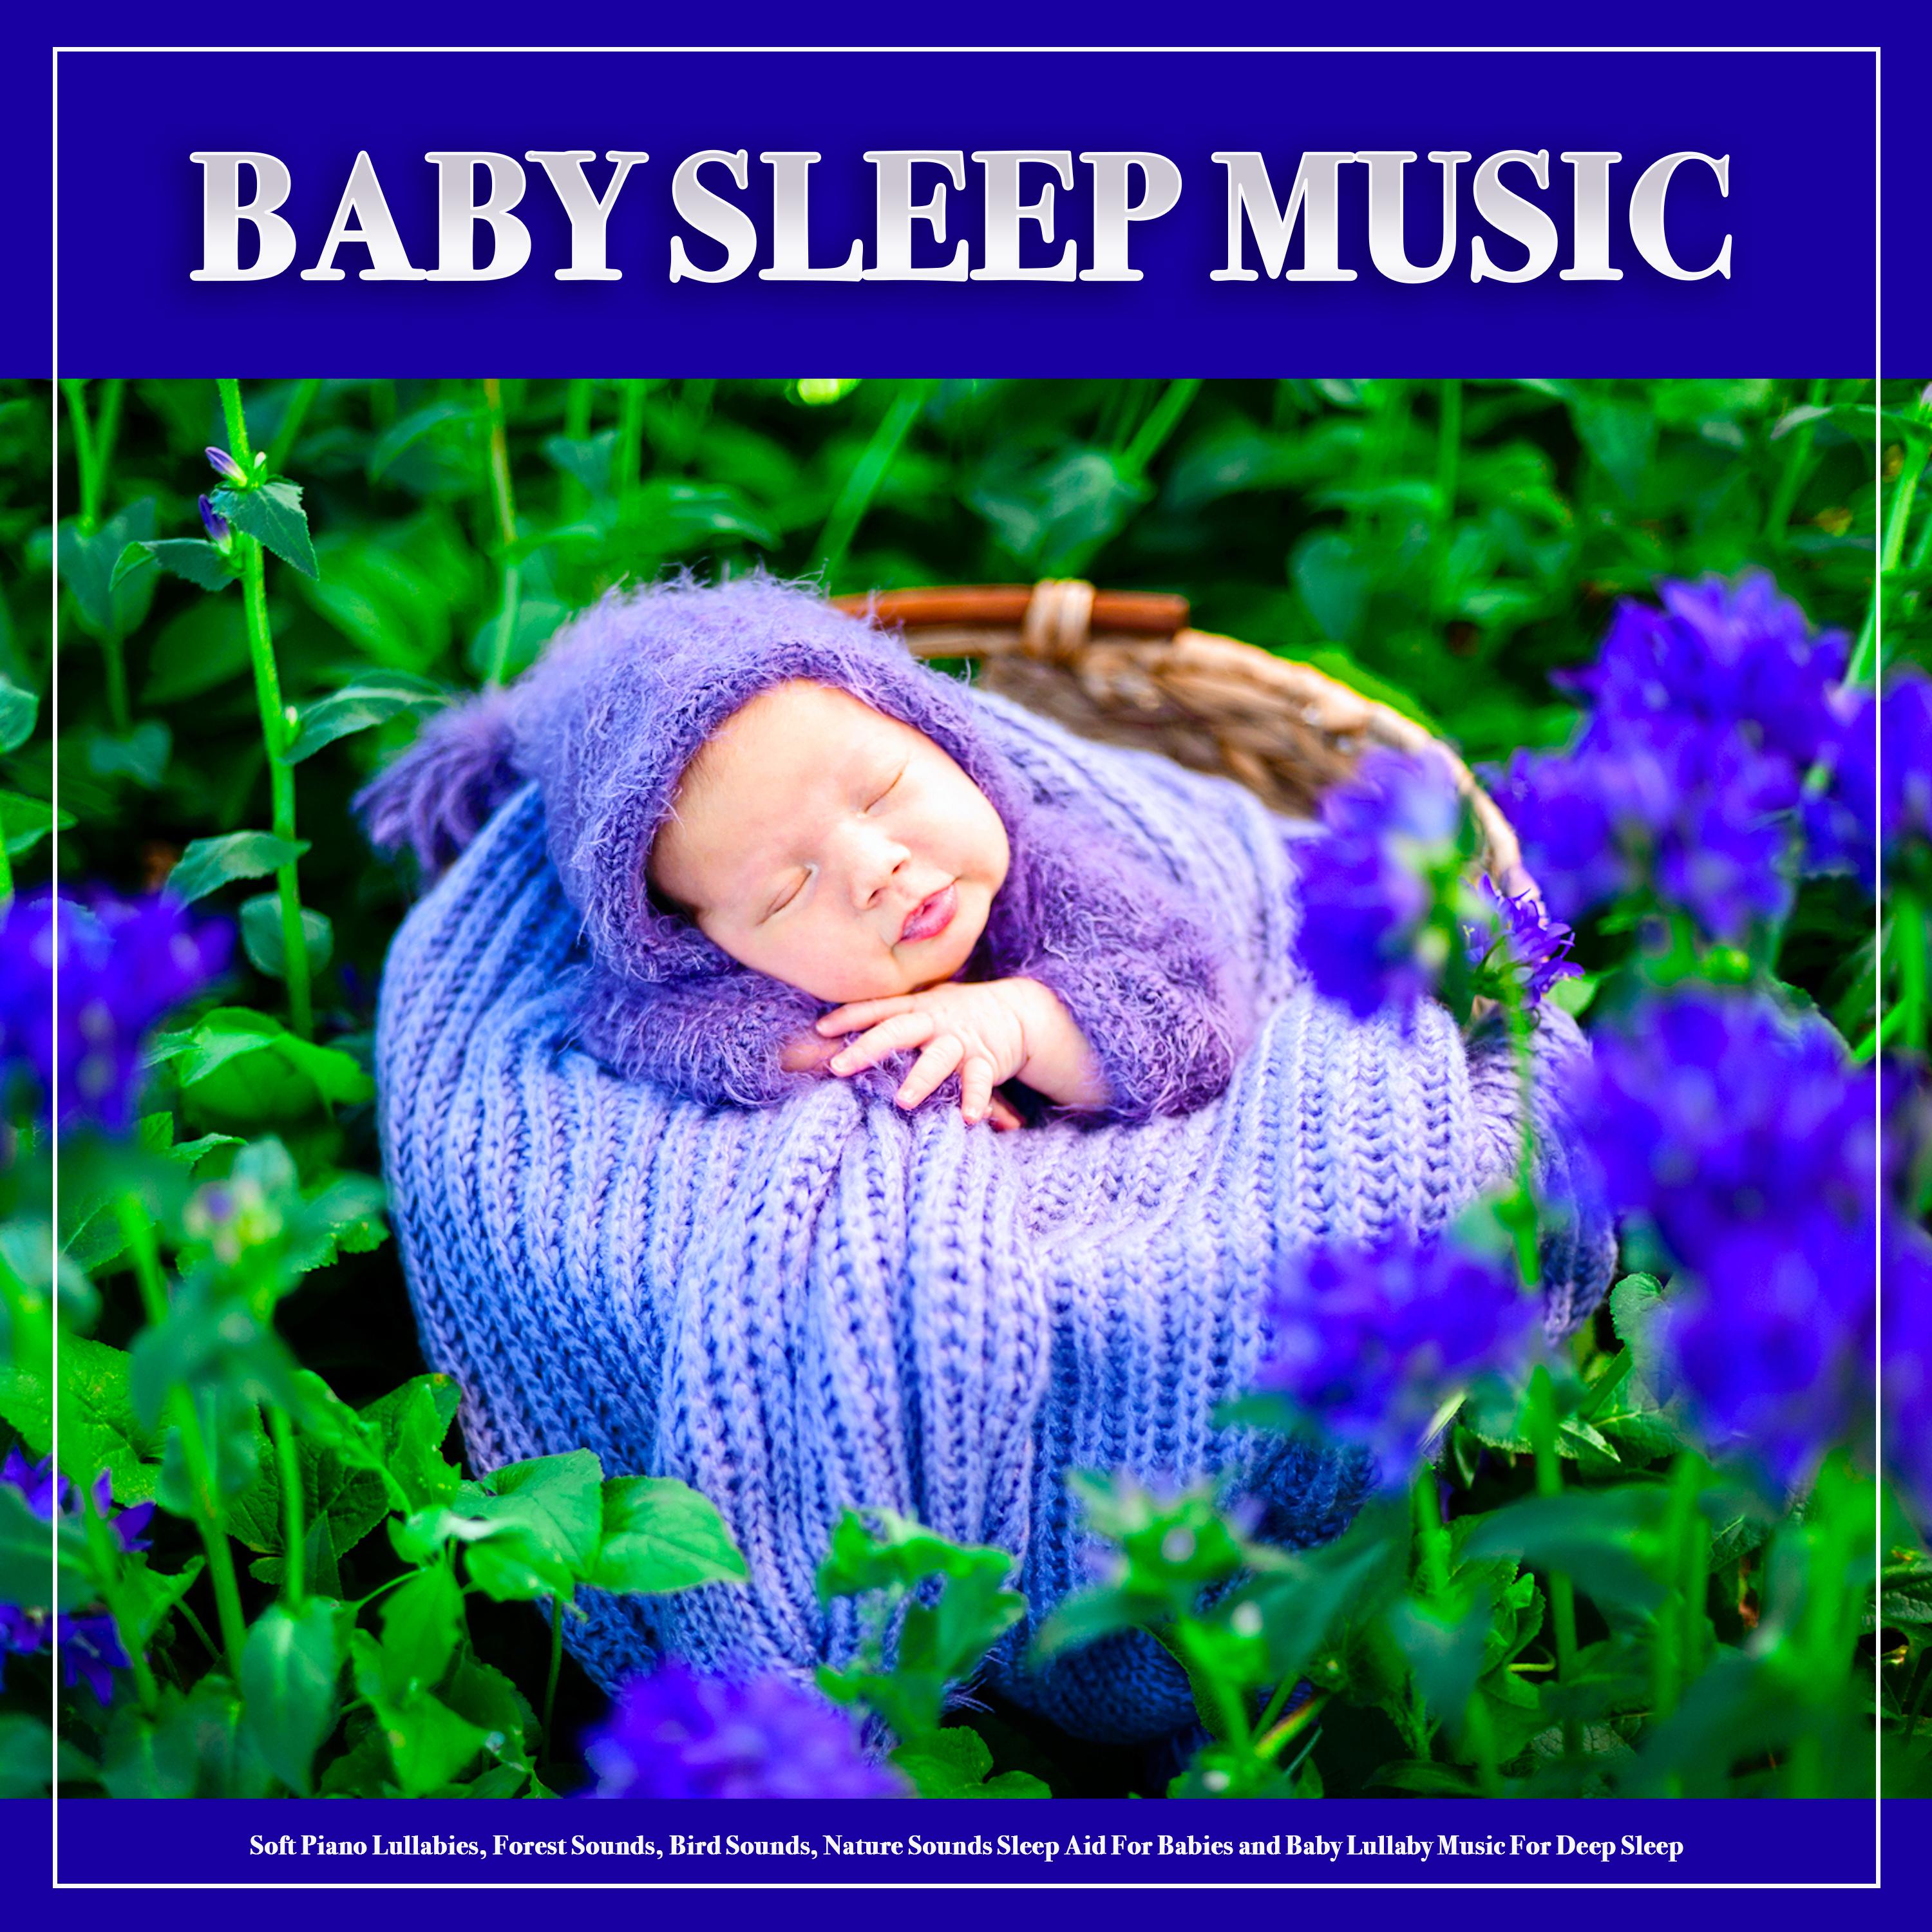 Lullabies and Forest Sounds for Baby Sleep